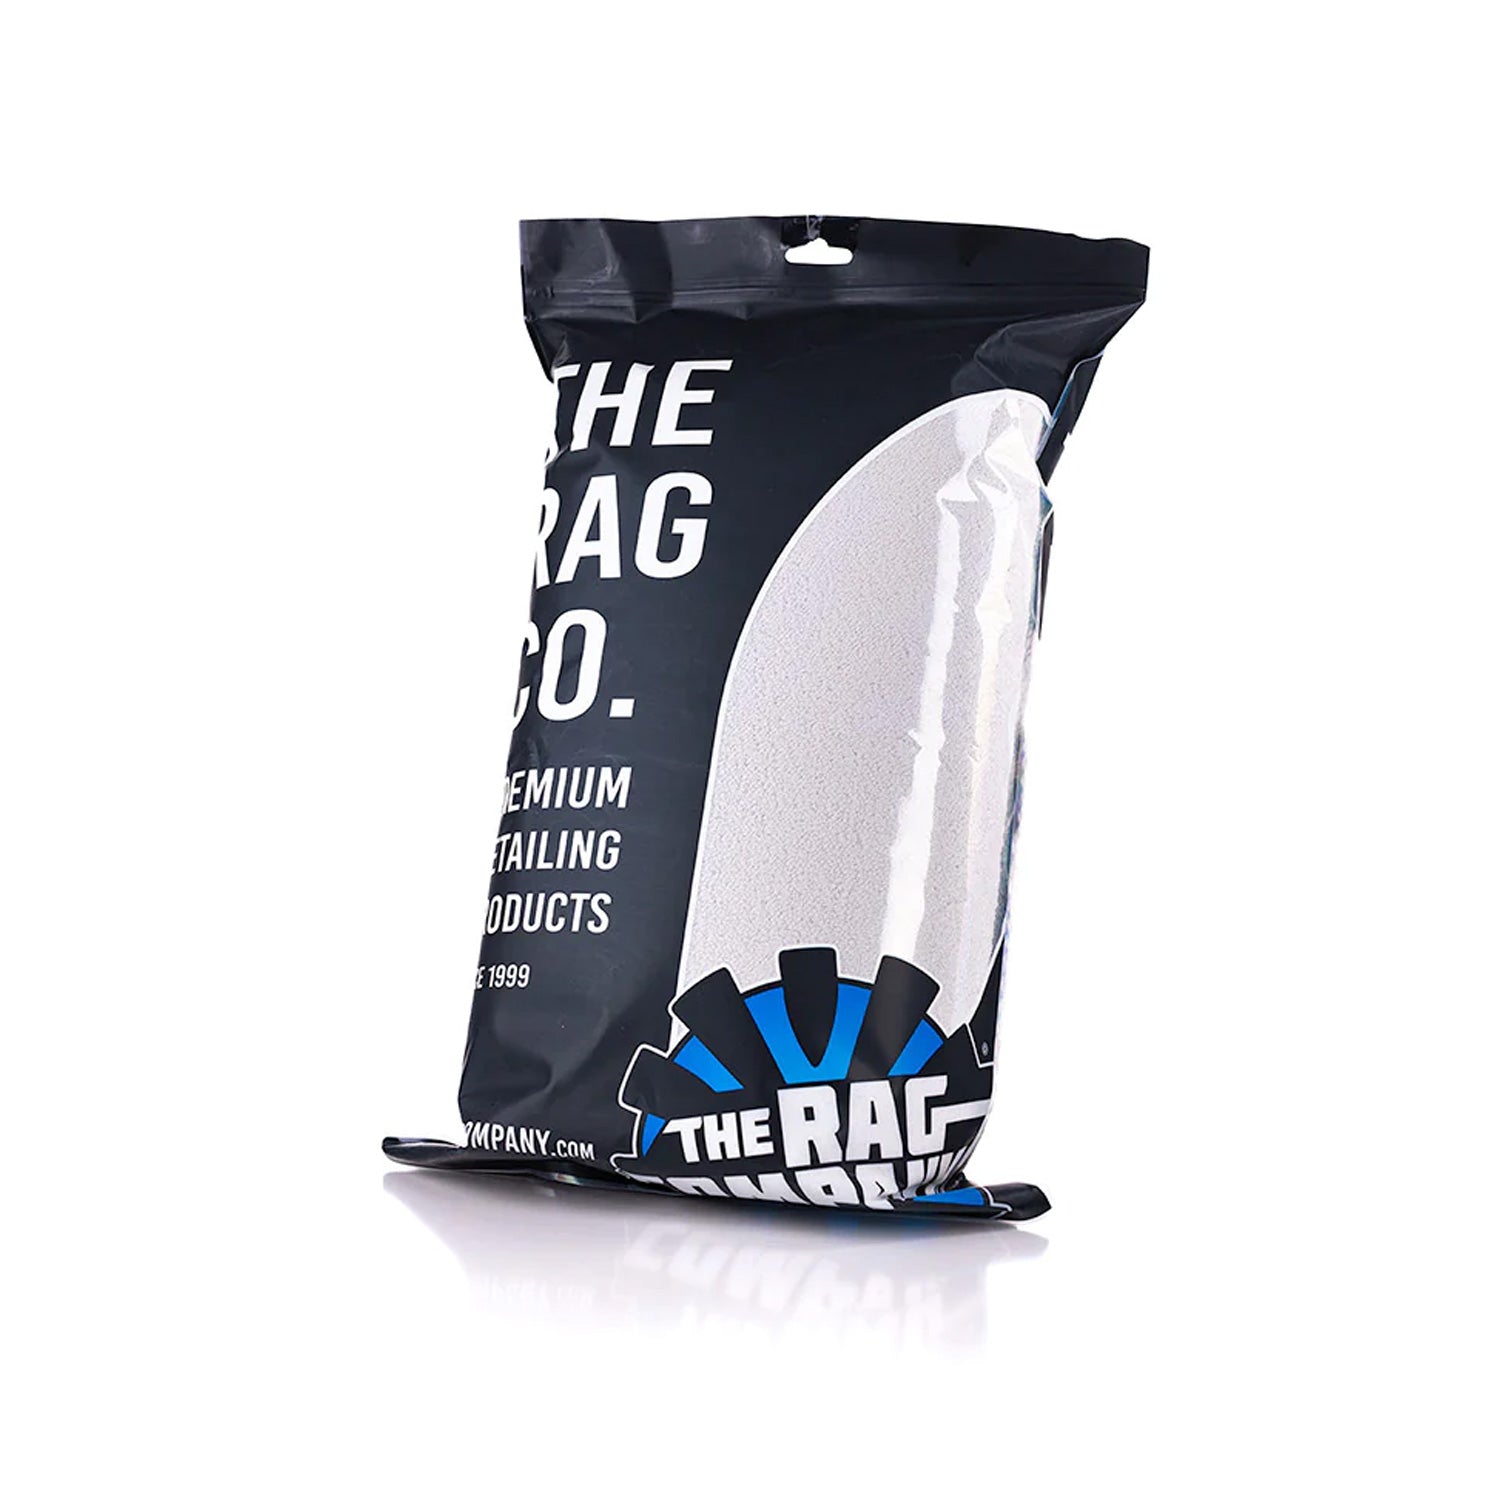 the-dryer-wolf-2-pack-rag-company-packaging